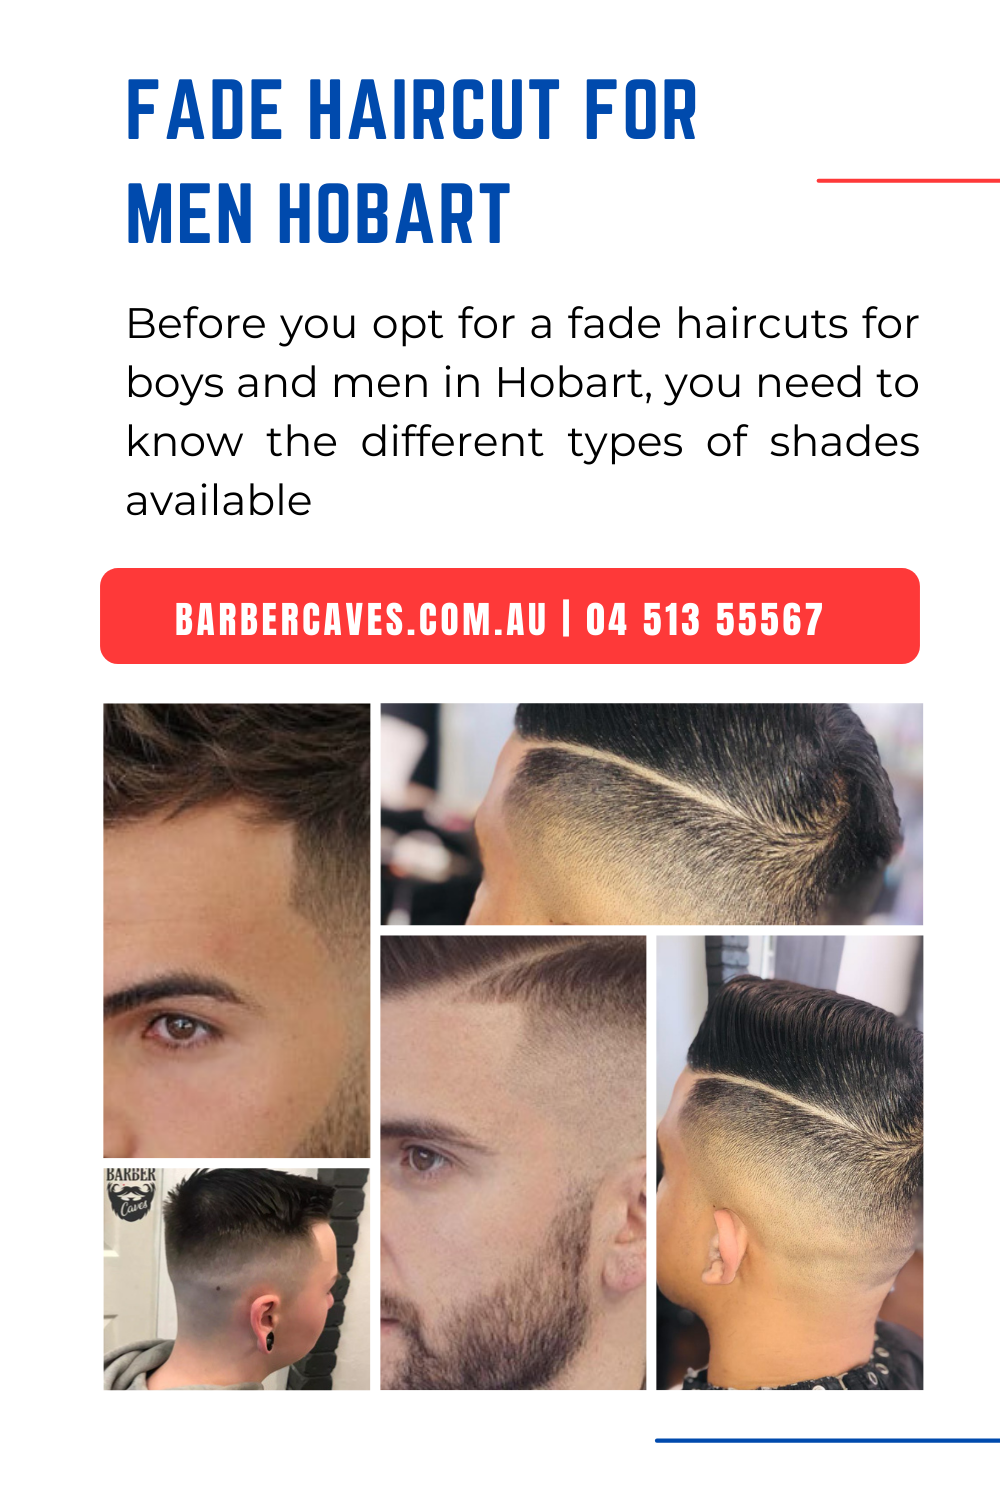 Haircuts and Hairstyles for Boys: Hair Styling tips for Boys (Kids) -  Sentinelassam